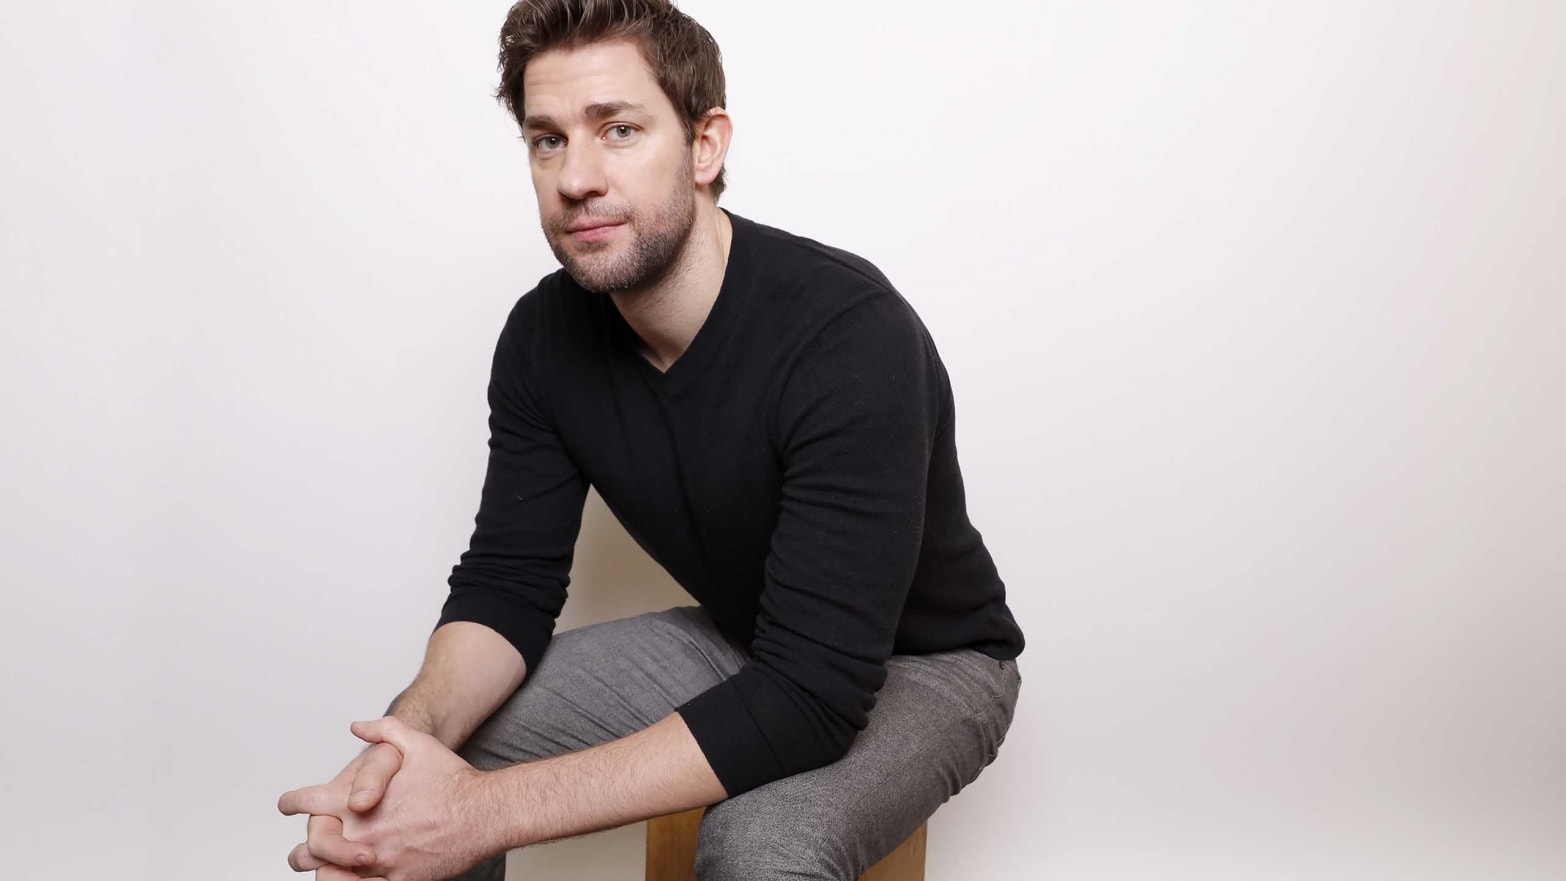 How Many of Time 100’s Most Influential People Can You Name? 07 John Krasinski